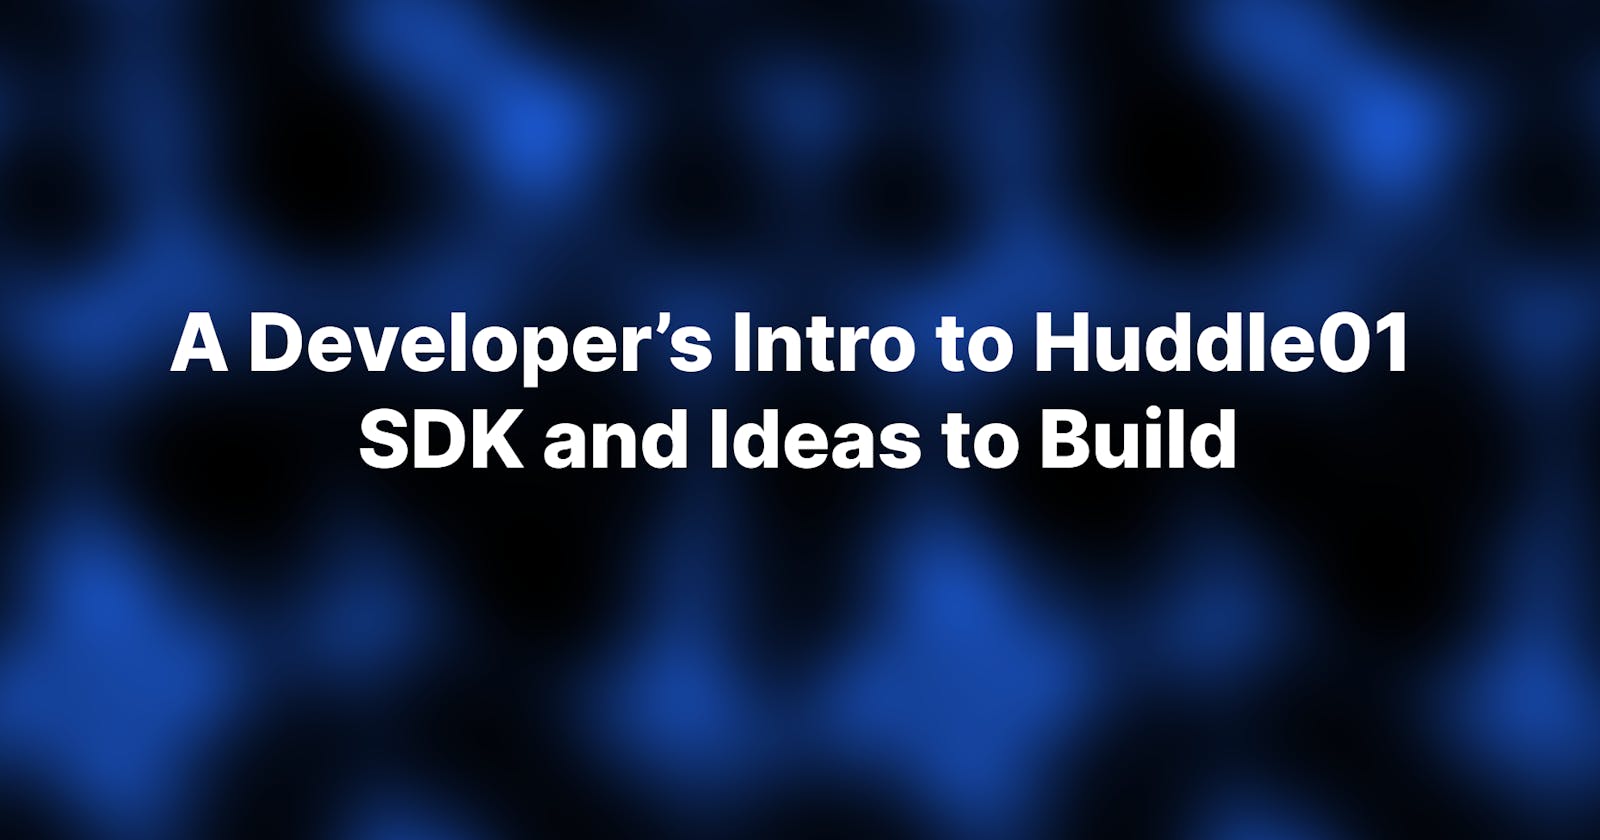 A Developer’s Intro to Huddle01 SDK and Ideas to Build.